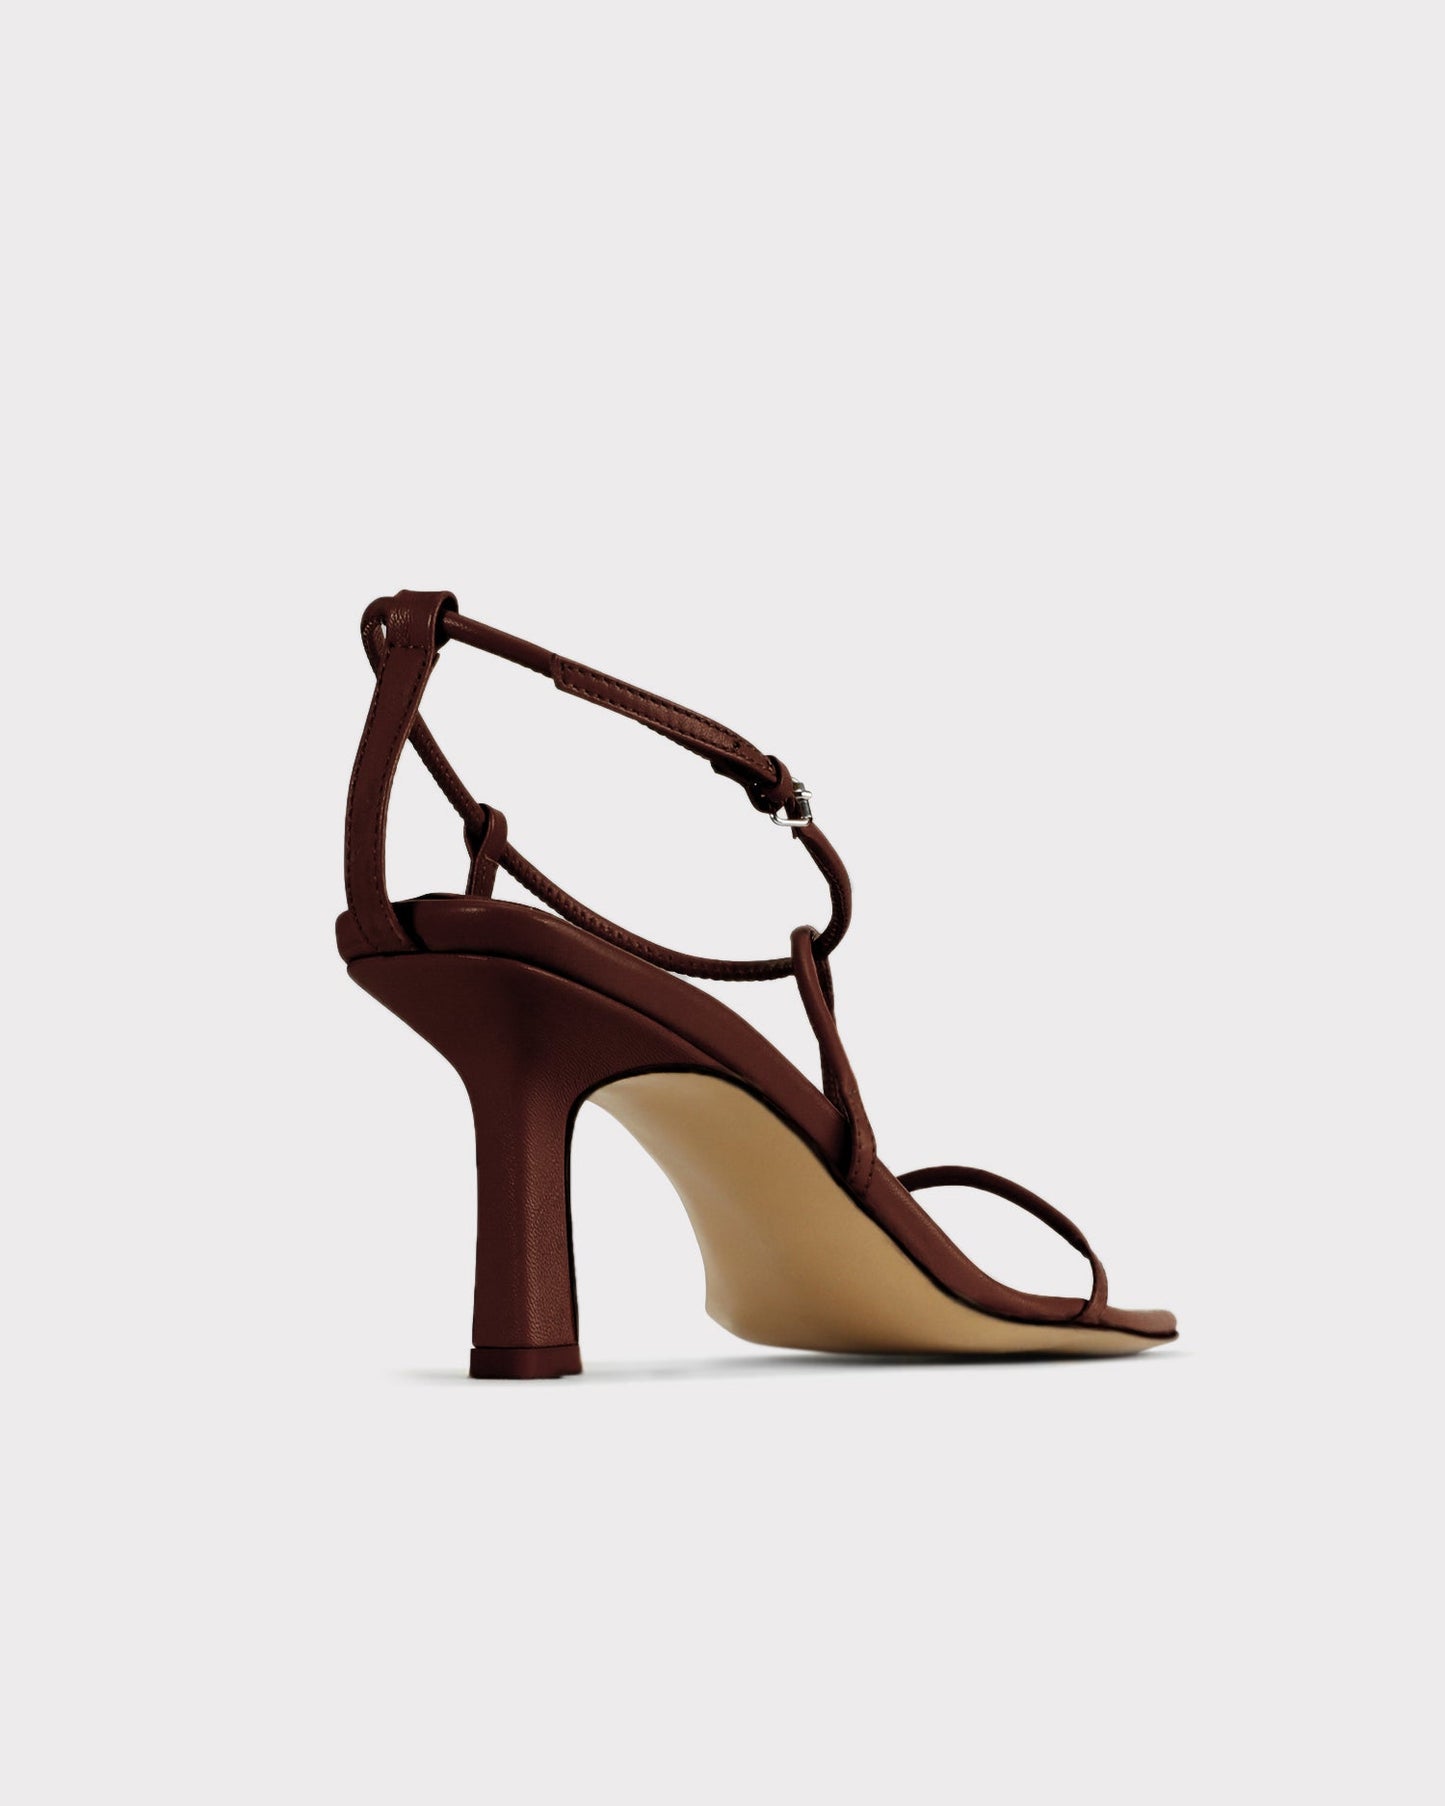 The Strappy Sandal - Chocolate